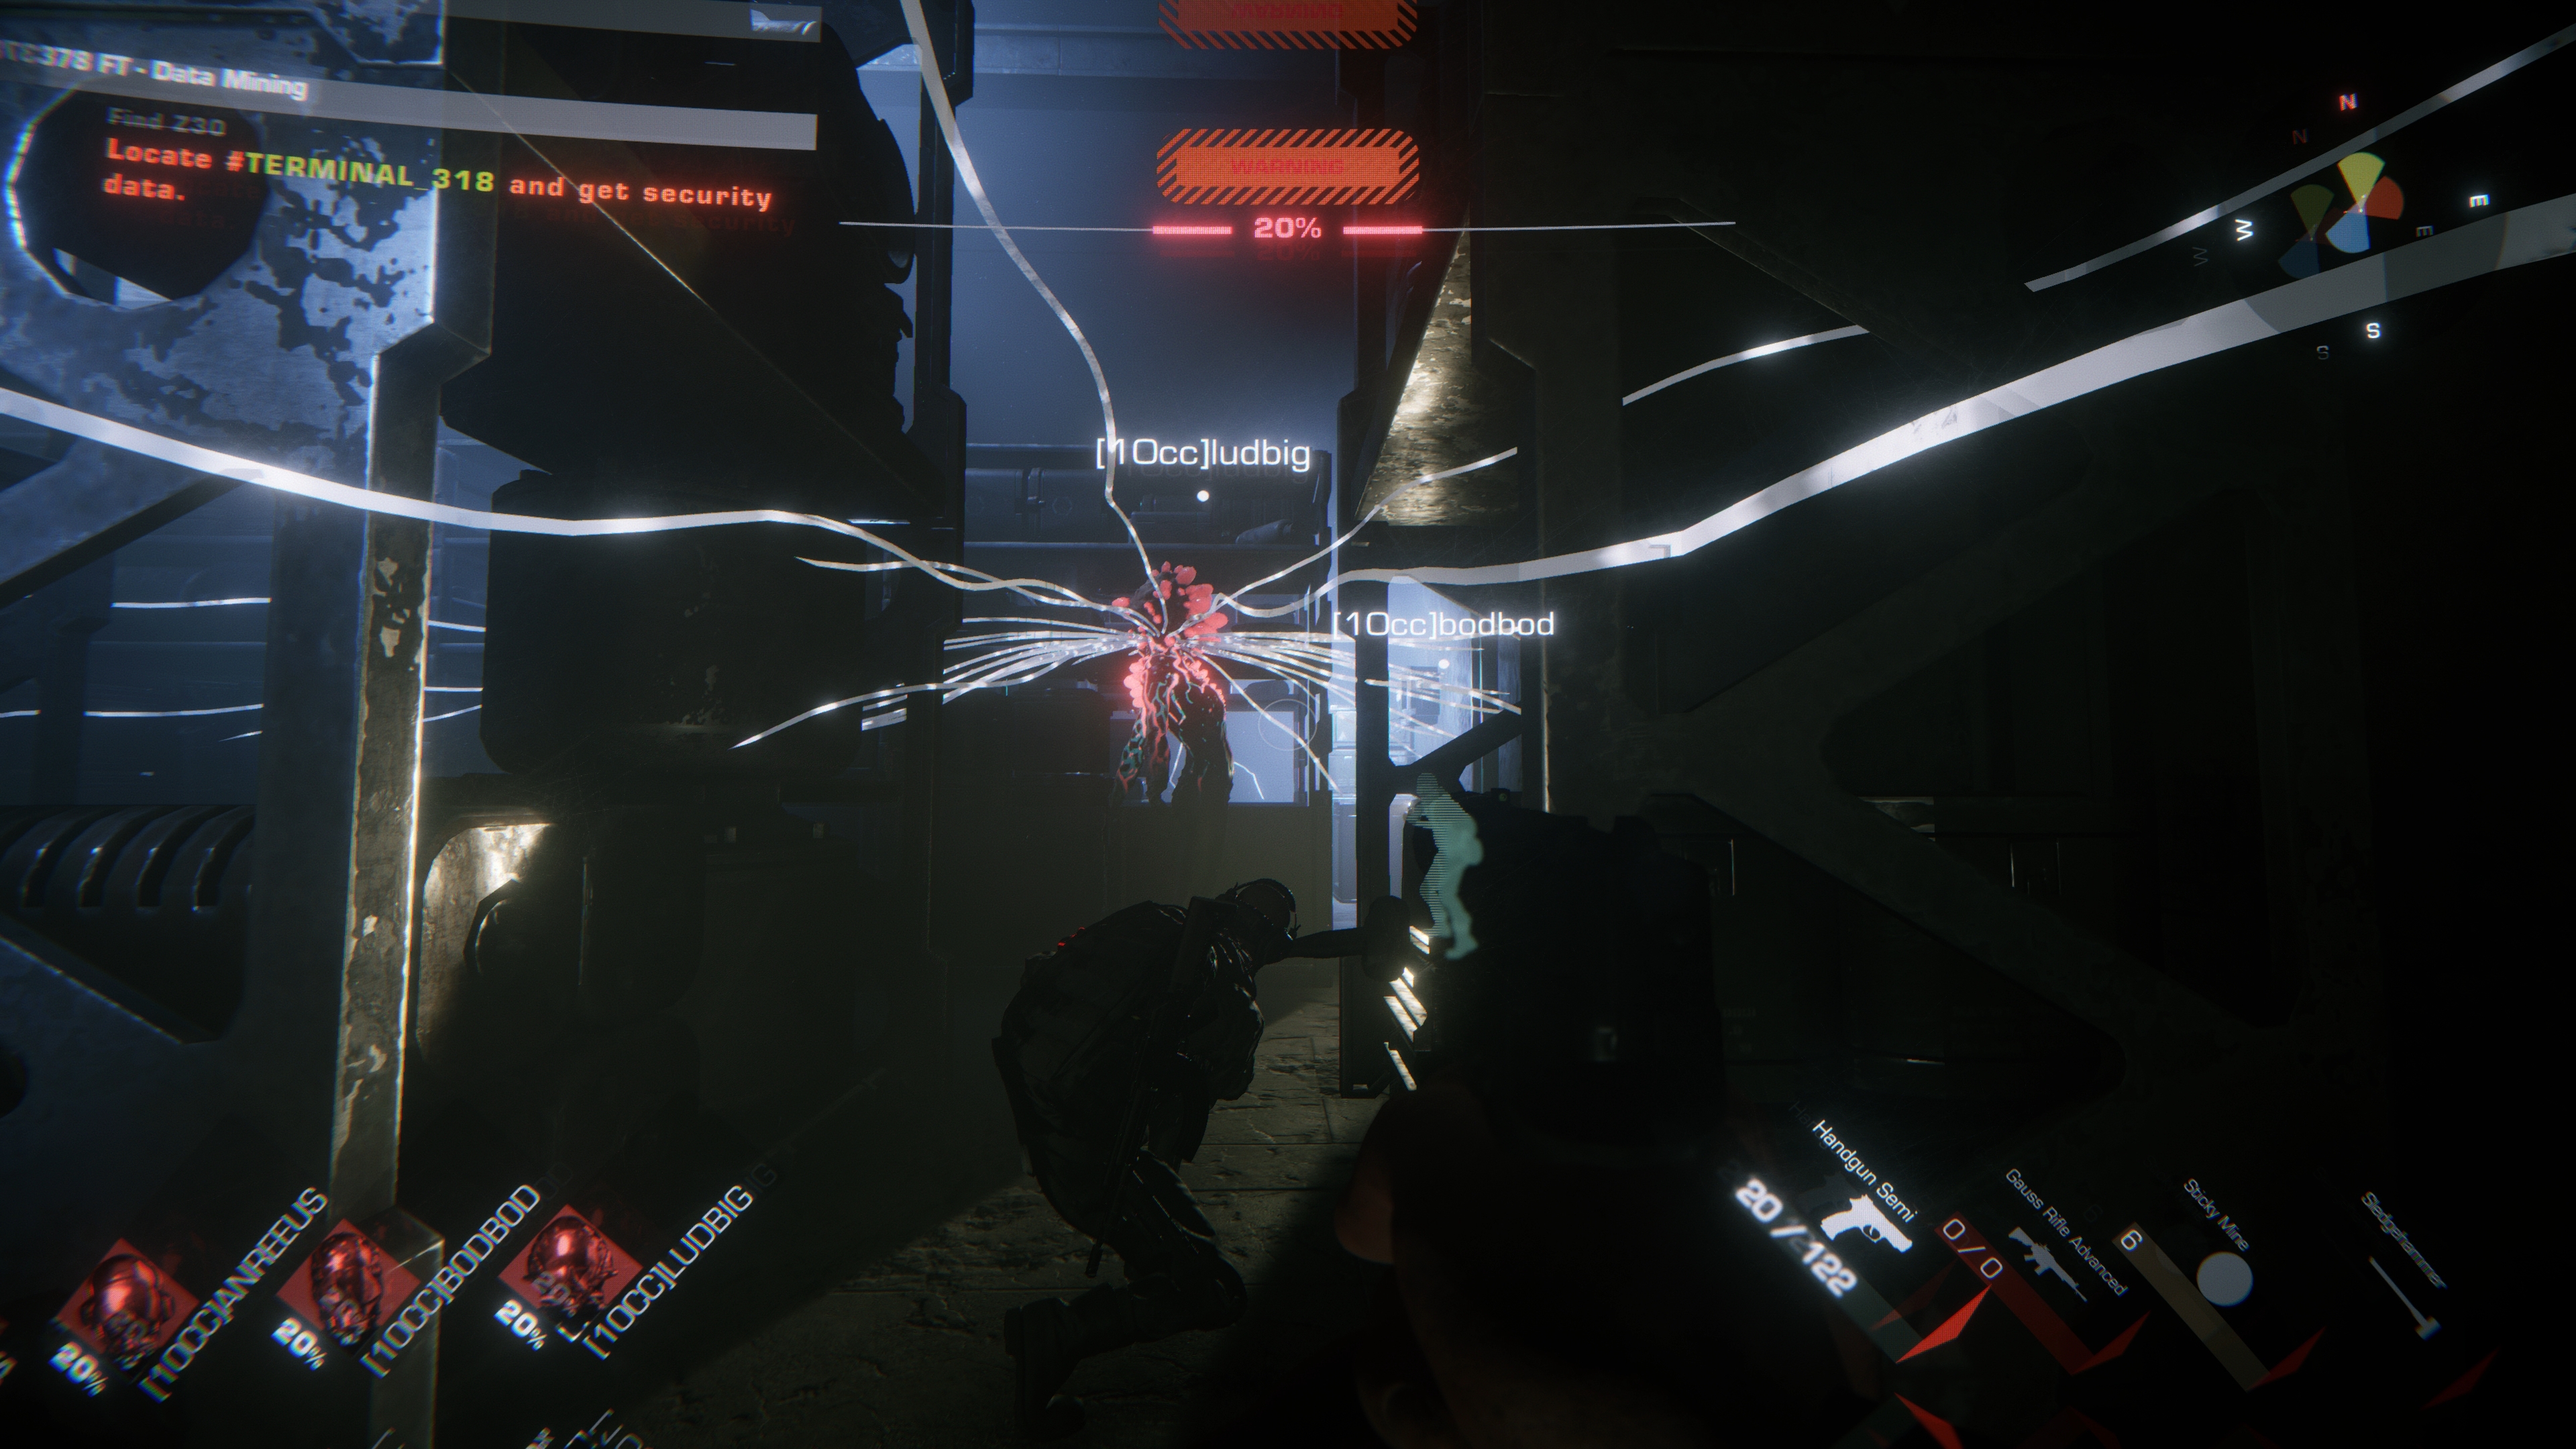 You need teamwork stealth and steady nerves to survive coop horror FPS GTFO